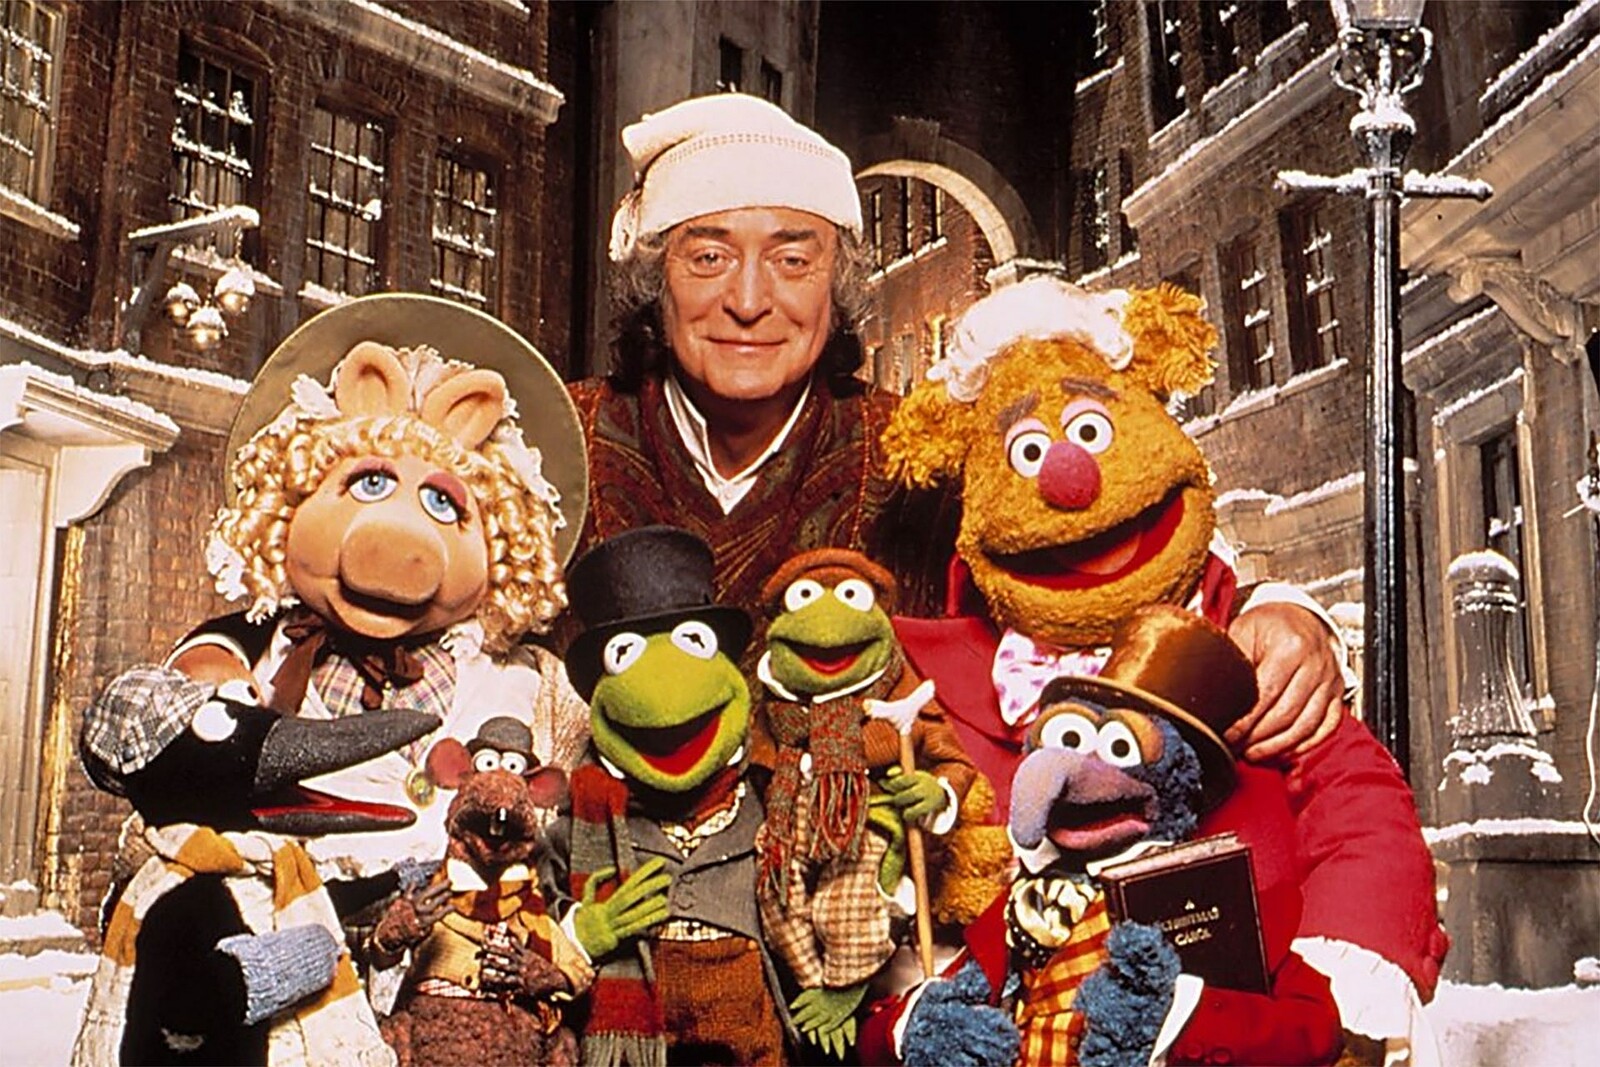 Muppets Christmas Carol by candlelight at St Stephen's Church